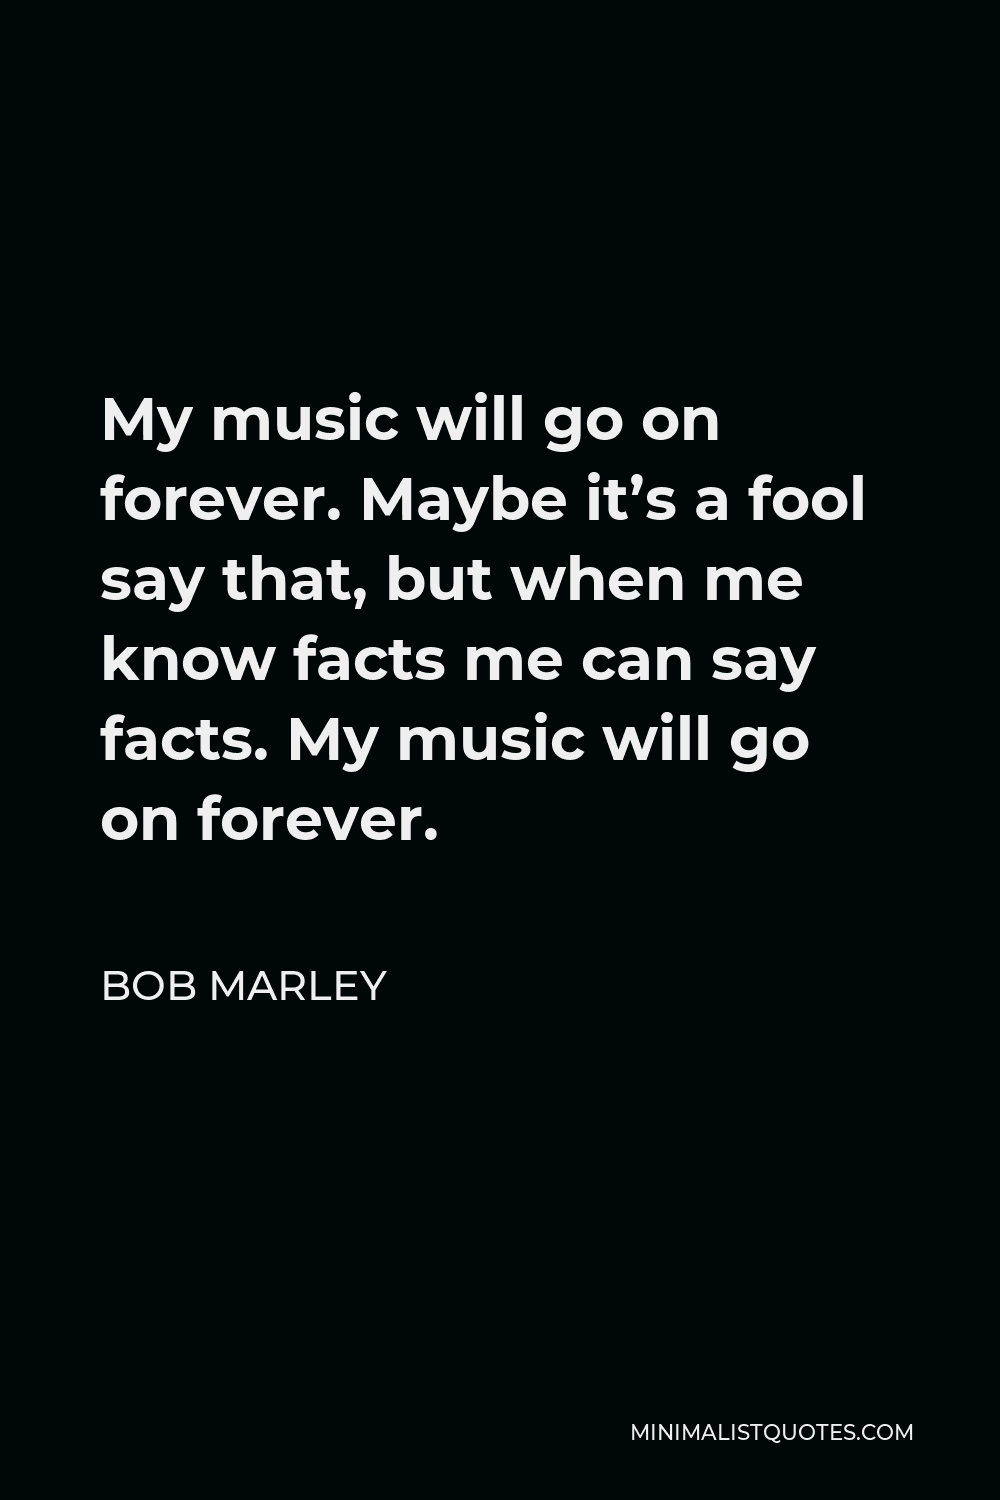 Bob Marley Quote - My music will go on forever. Maybe it’s a fool say that, but when me know facts me can say facts. My music will go on forever.